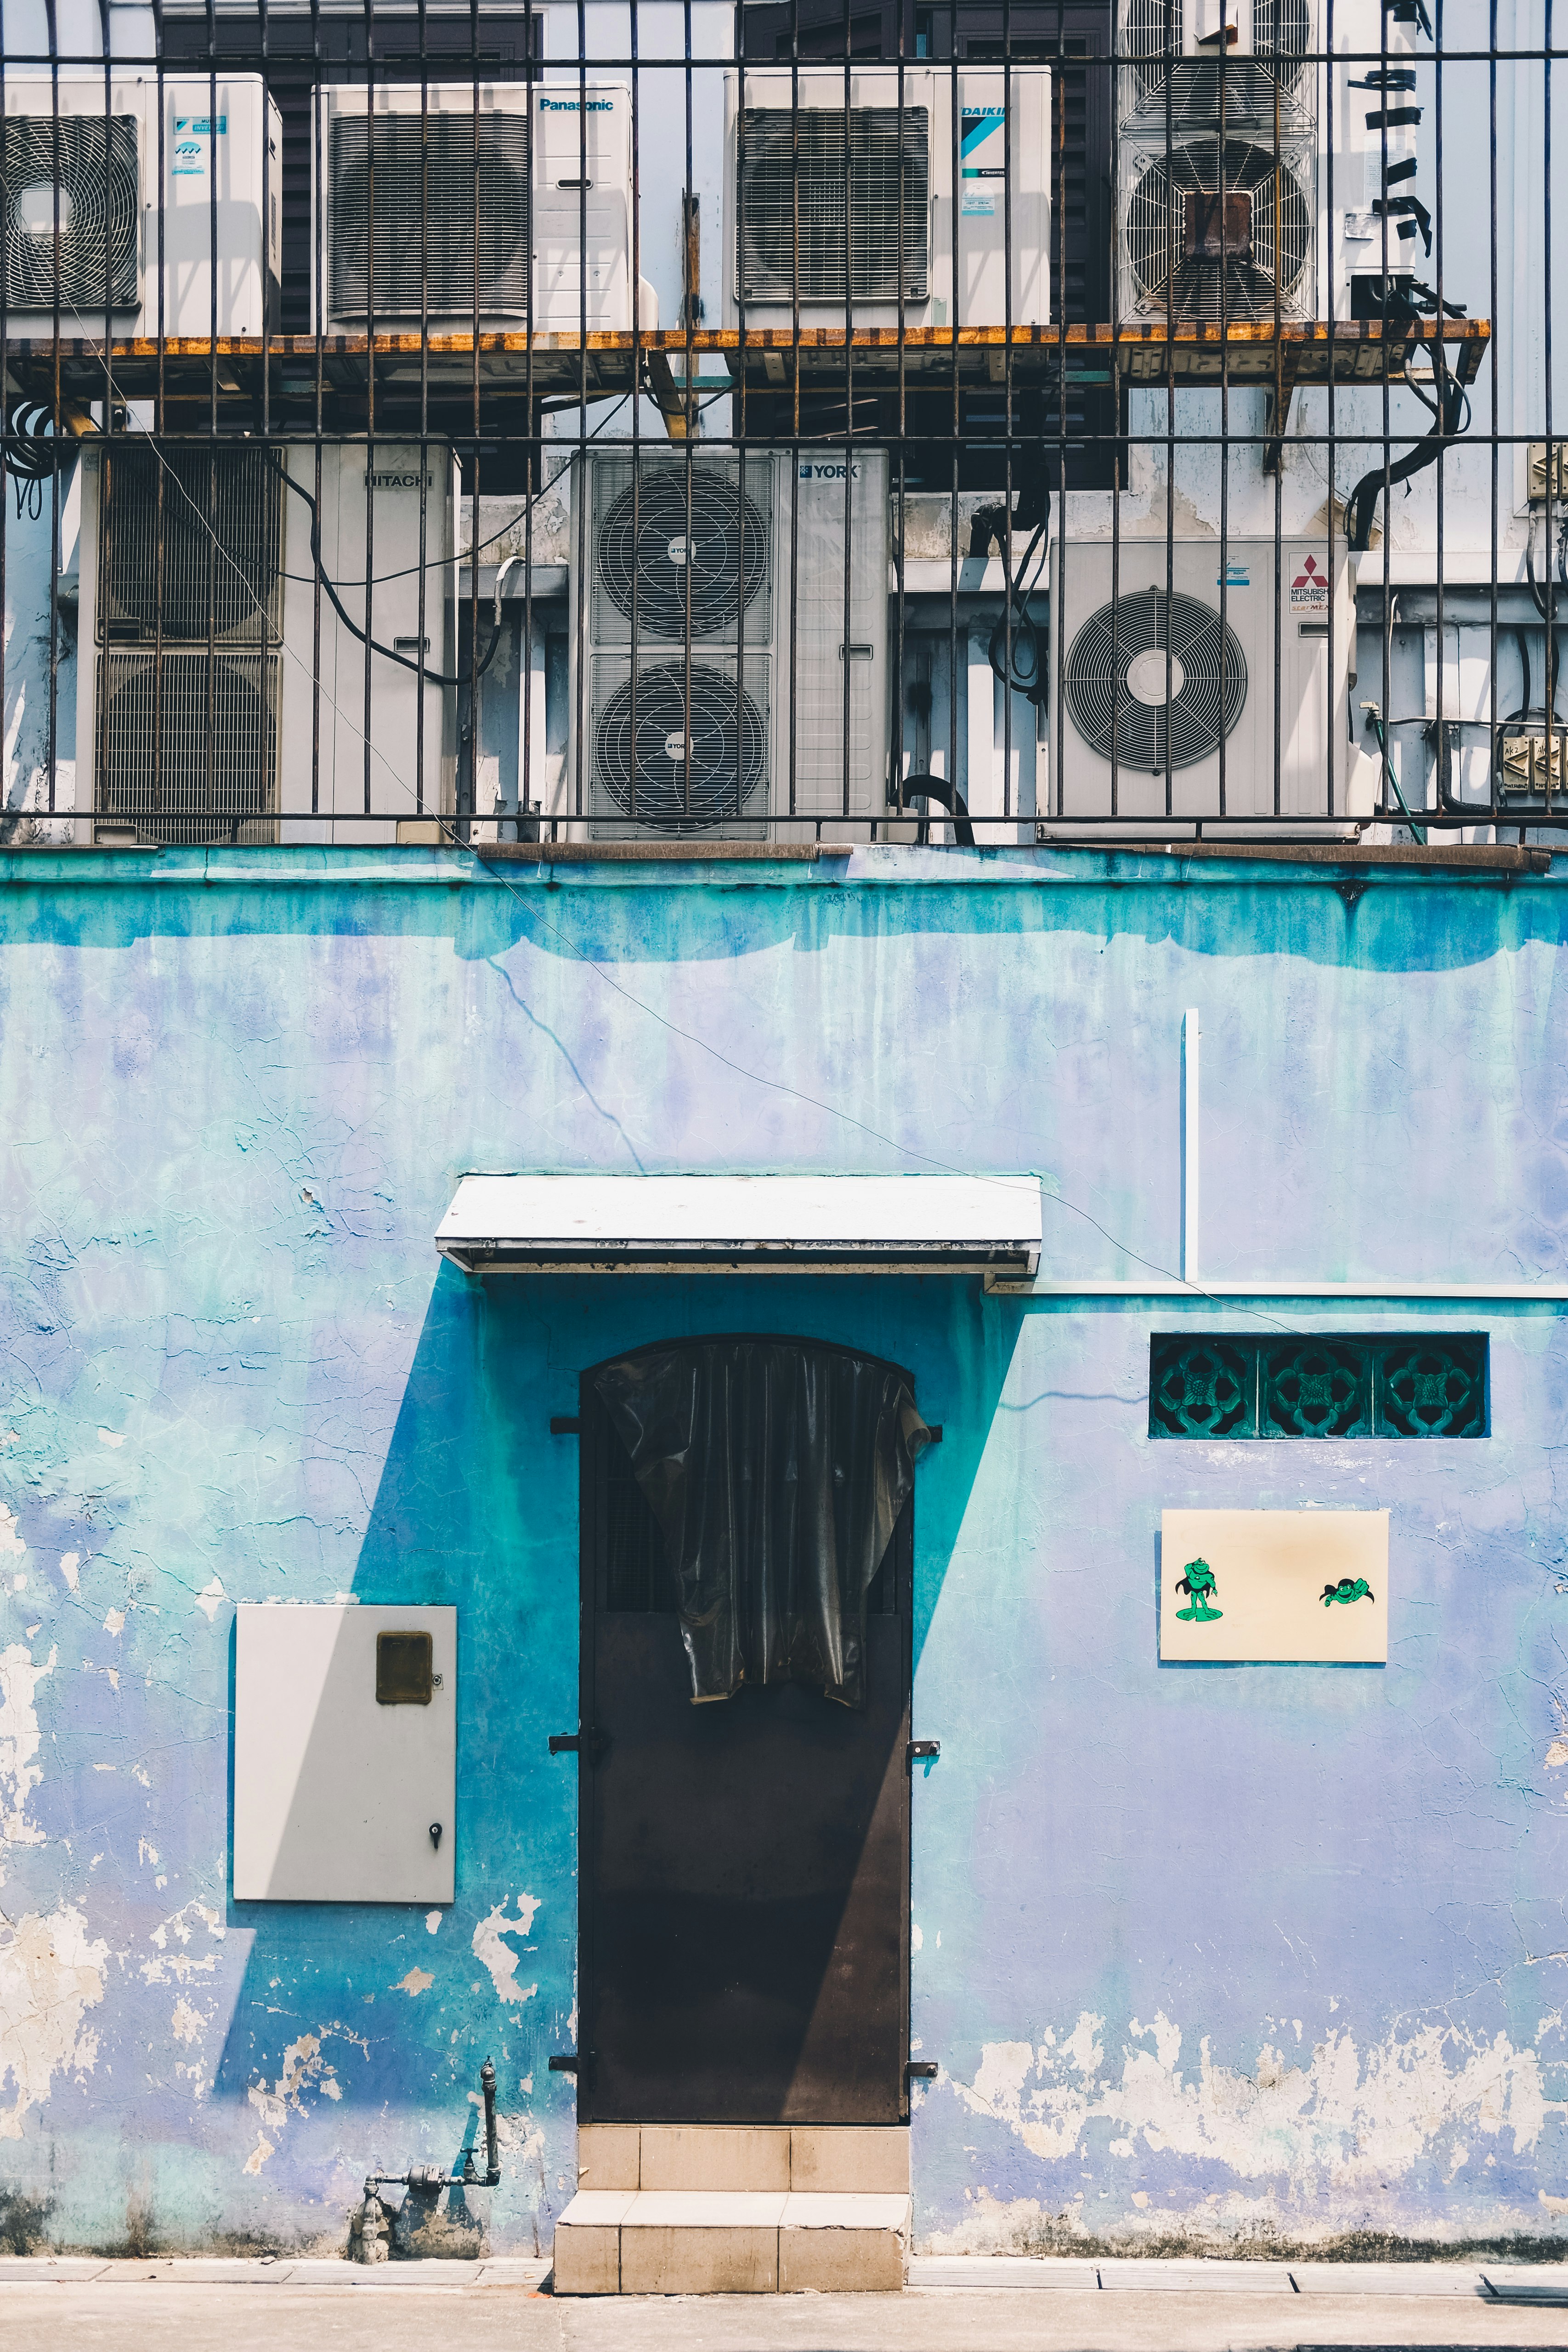 Another photo from the photowalk I did alone - I was supposed to head back home when I chanced upon this alleyway with really pretty blue walls and textures. Decided to make a short detour to take a picture of it because I really love how the blue is like here.